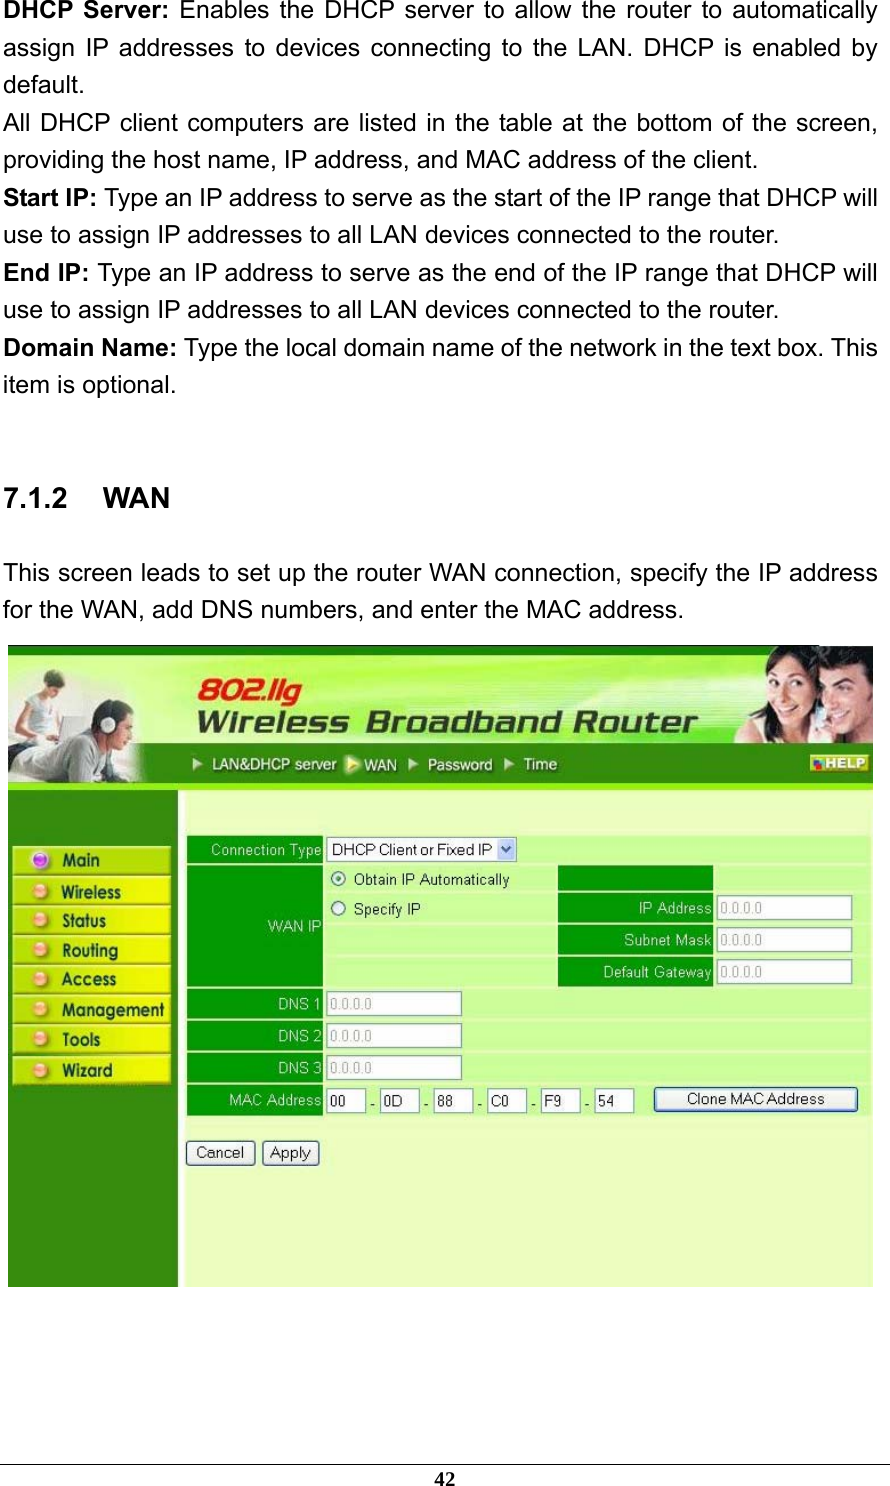 DHCP Server: Enables the DHCP server to allow the router to automatically assign IP addresses to devices connecting to the LAN. DHCP is enabled by default. All DHCP client computers are listed in the table at the bottom of the screen, providing the host name, IP address, and MAC address of the client. Start IP: Type an IP address to serve as the start of the IP range that DHCP will use to assign IP addresses to all LAN devices connected to the router. End IP: Type an IP address to serve as the end of the IP range that DHCP will use to assign IP addresses to all LAN devices connected to the router. Domain Name: Type the local domain name of the network in the text box. This item is optional.  7.1.2 WAN This screen leads to set up the router WAN connection, specify the IP address for the WAN, add DNS numbers, and enter the MAC address.     42 